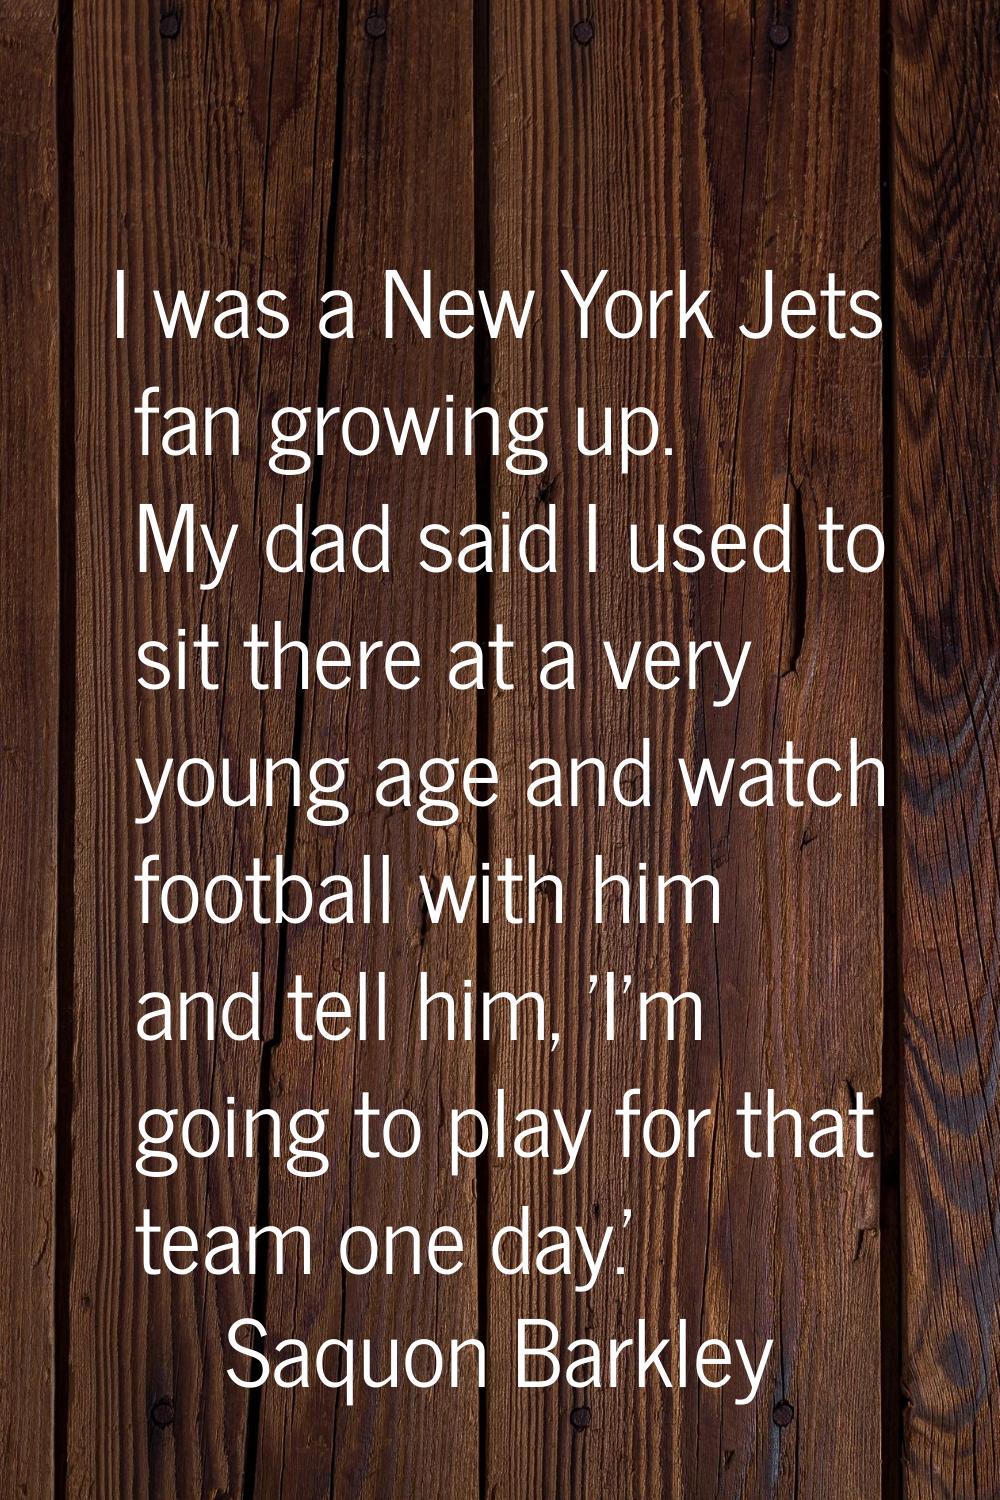 I was a New York Jets fan growing up. My dad said I used to sit there at a very young age and watch